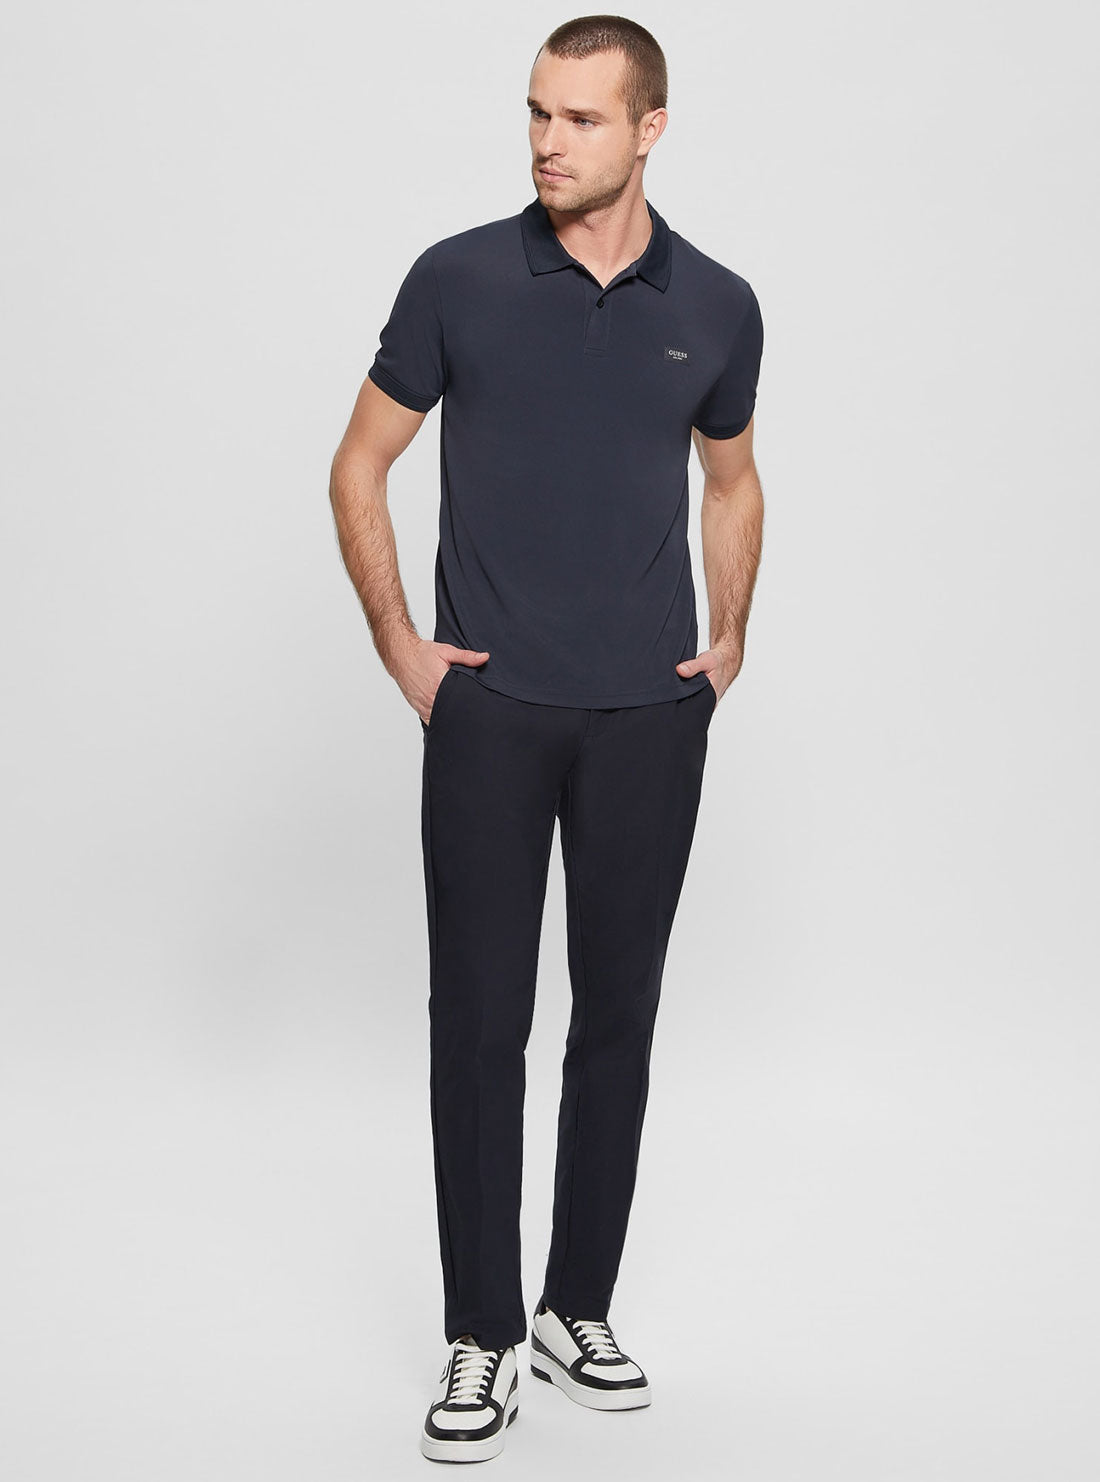 Navy Blue Stretch Polo T-Shirt | GUESS men's apparel | full view